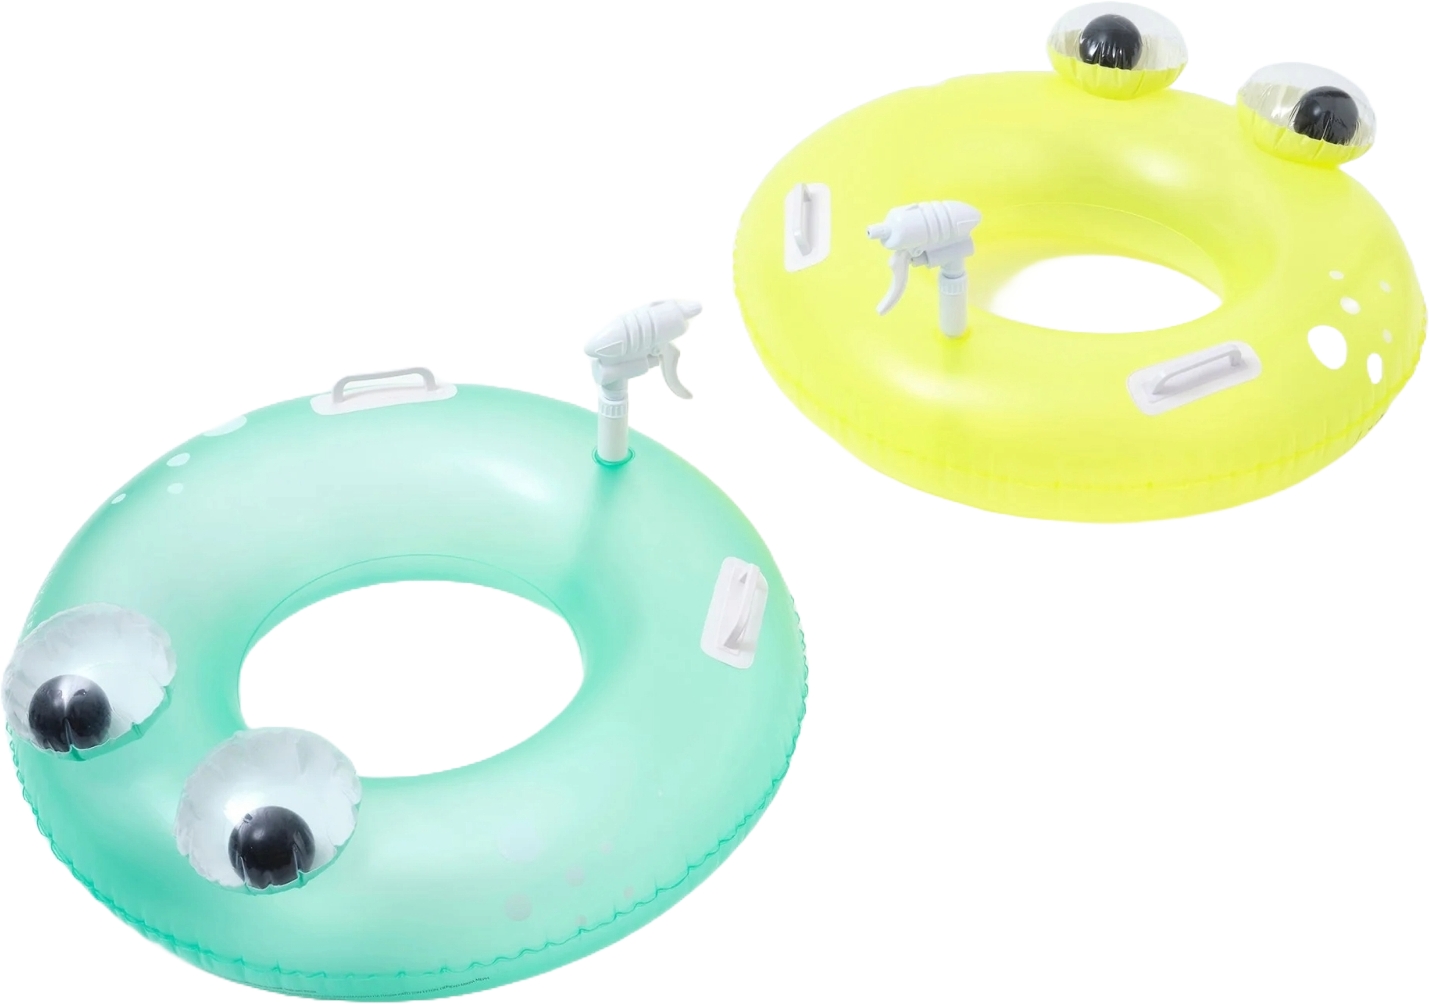 Sunnylife Pool Ring Soakers Sonny Citrus Set of 2